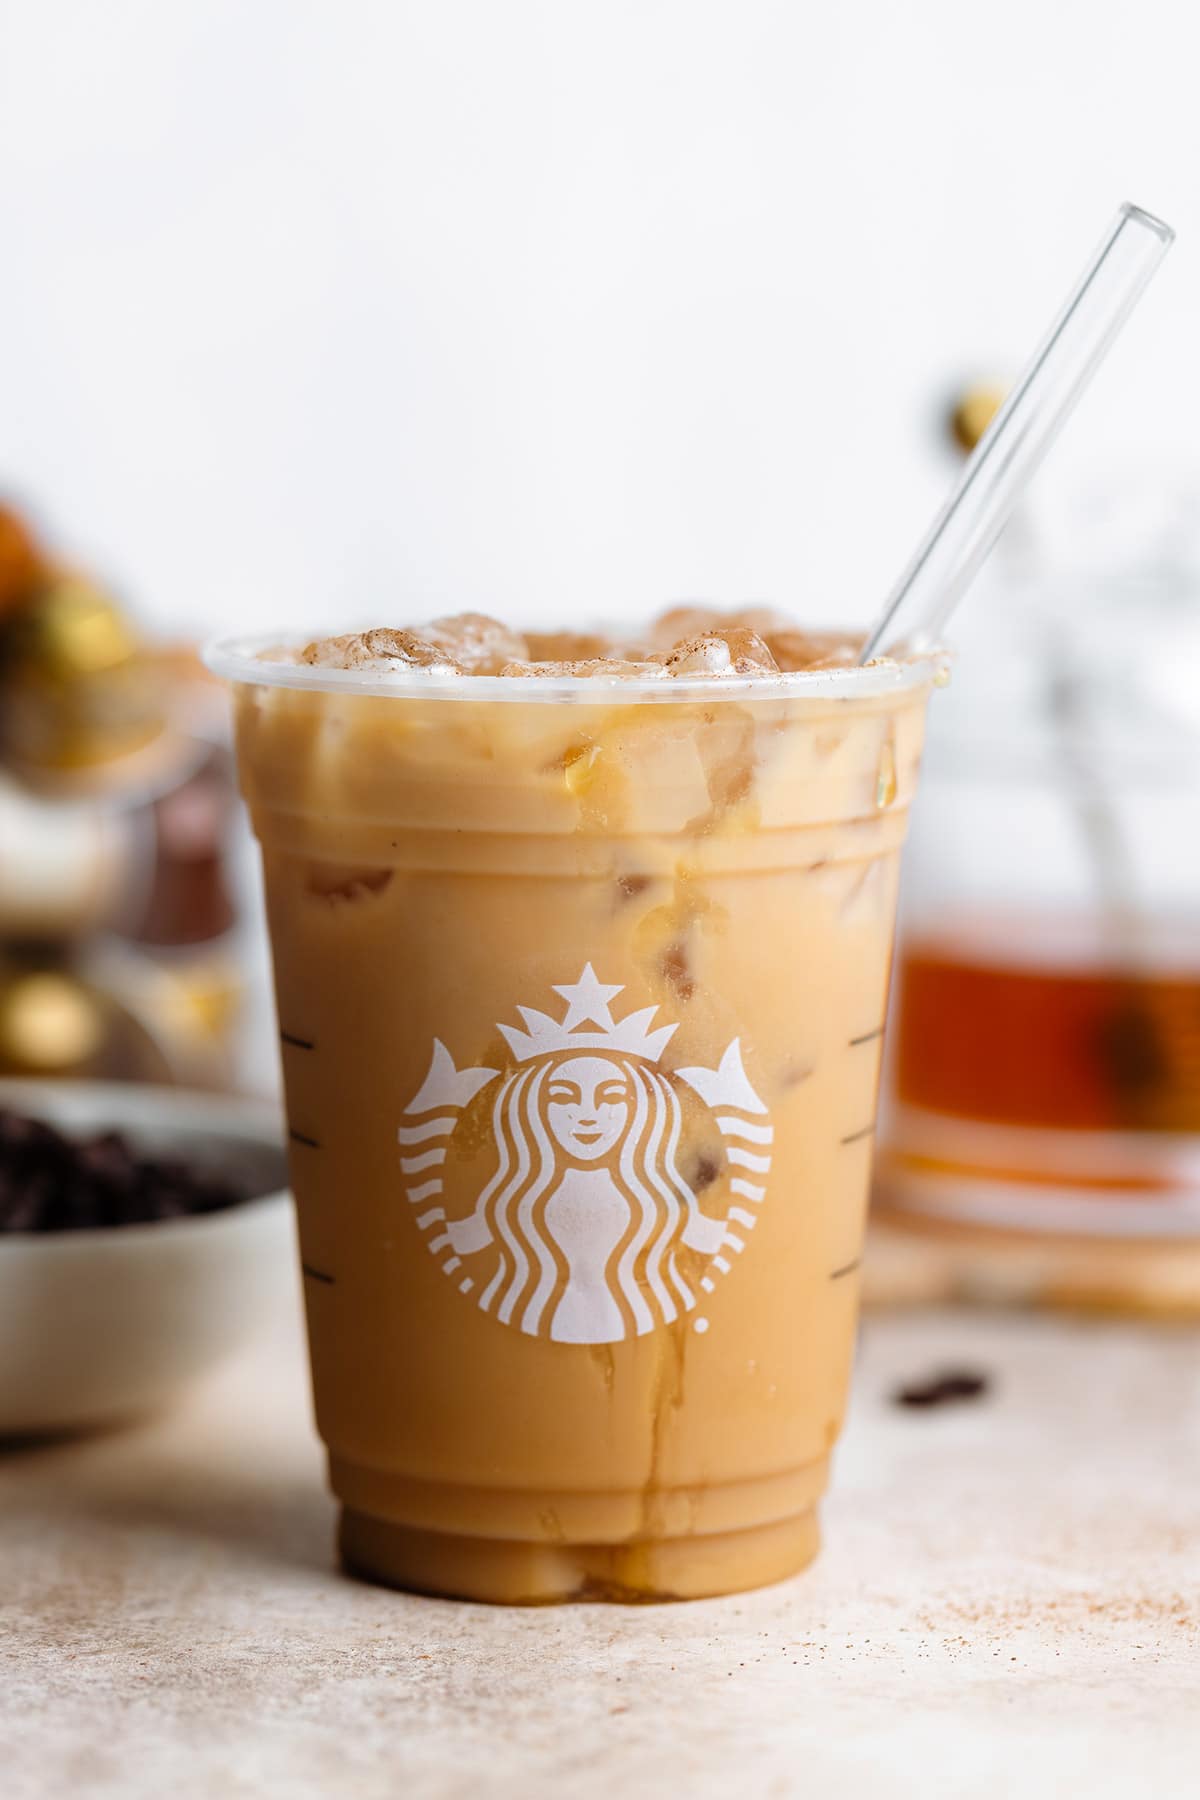 Iced coffee in a plastic Starbucks cup with a honey drizzle and a glass straw.